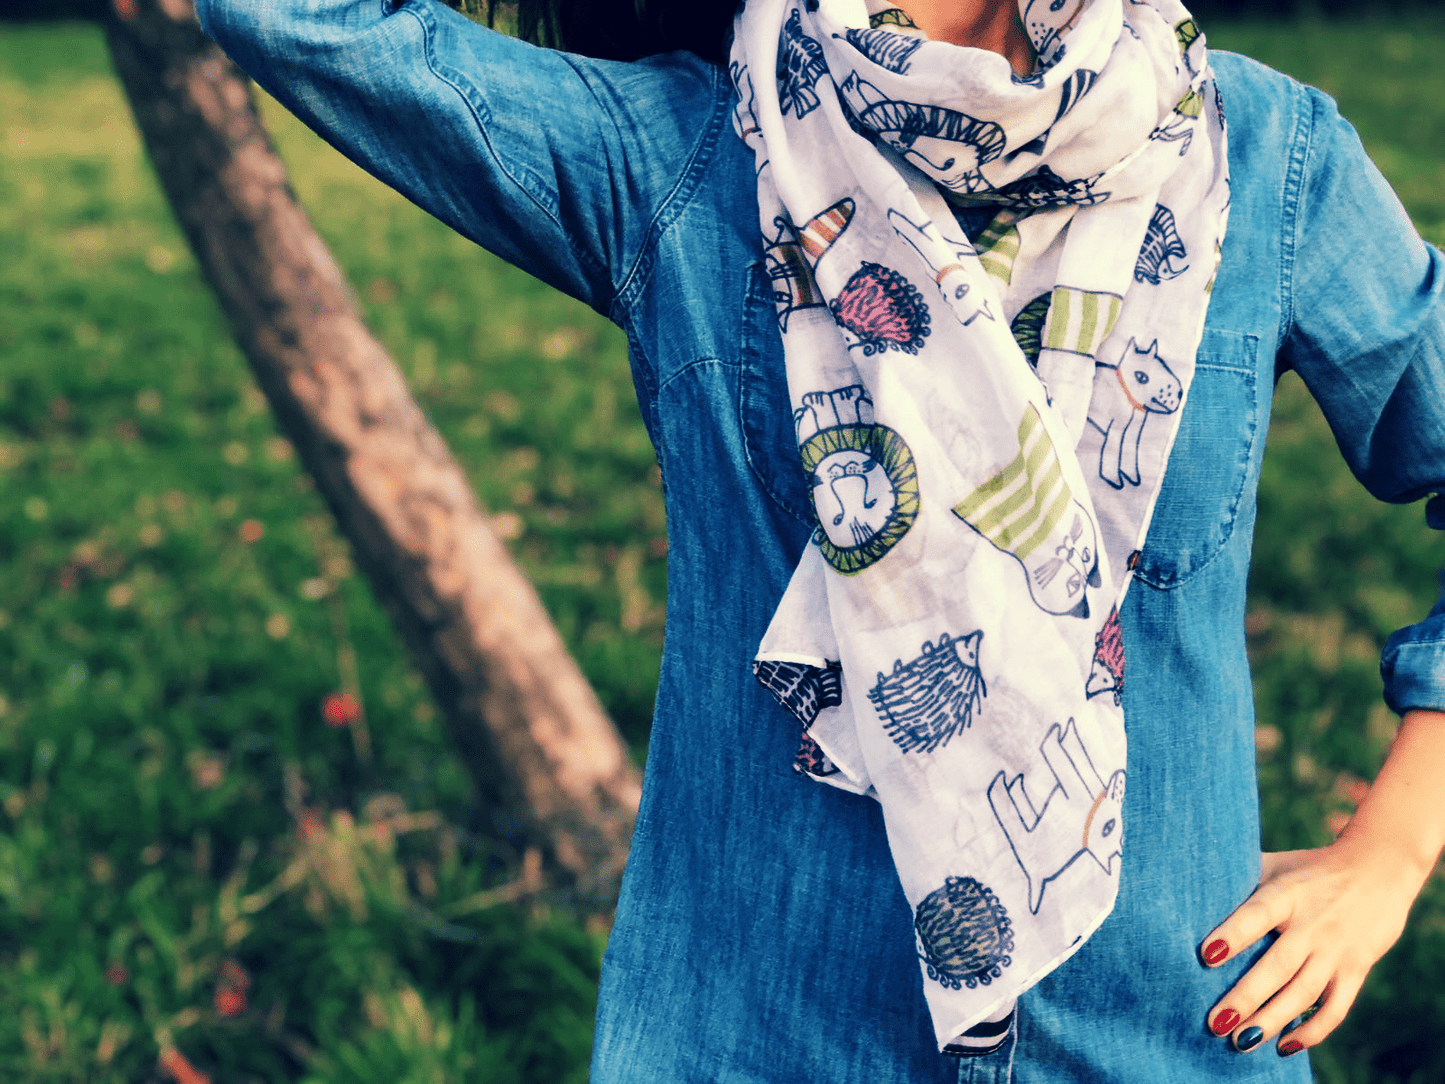 This cotton scarf is an elegant, soft and light scarf with animal patterns representing dogs, cats, hedge, lions to give you a happy, fresh and modern look. This is a sustainable and vegan scarf made from 75% cotton and 25% recycled polyester.